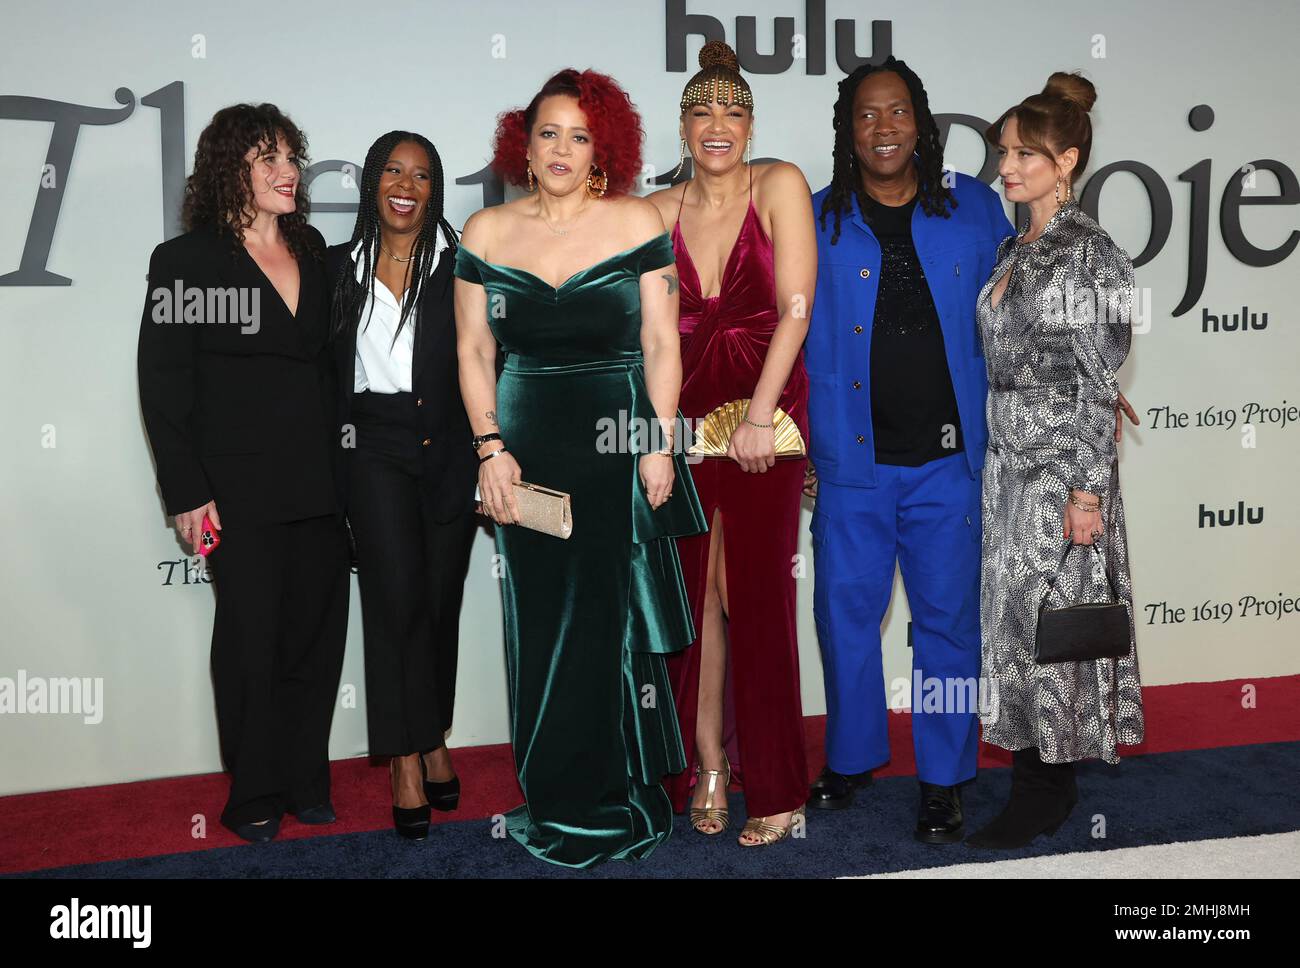 Los Angeles, USA. 26th Jan, 2023. Caitlin Roper, Tara Duncan, Nikole Hannah-Jones, Shoshana Guy, Roger Ross Williams, Kathleen Lingo at Los Angeles Red Carpet Premiere Event For Hulu's 'The 1619 Project' at Academy Museum of Motion Pictures in Los Angeles, CA, USA on January 26, 2022. Photo by Fati Sadou/ABACAPRESS.COM Credit: Abaca Press/Alamy Live News Stock Photo